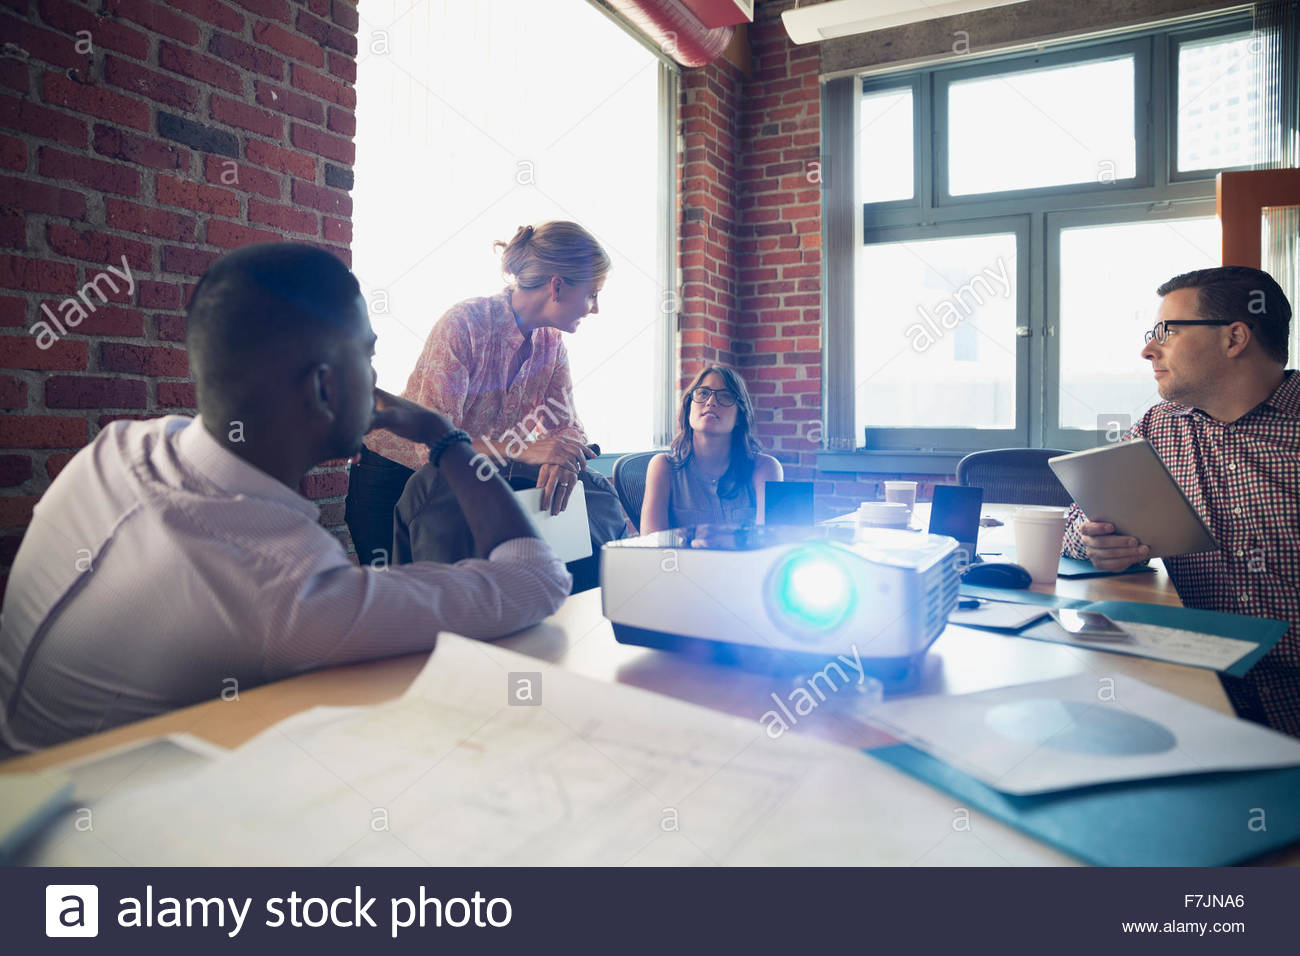 Business people meeting in conference room with projector Stock Photo